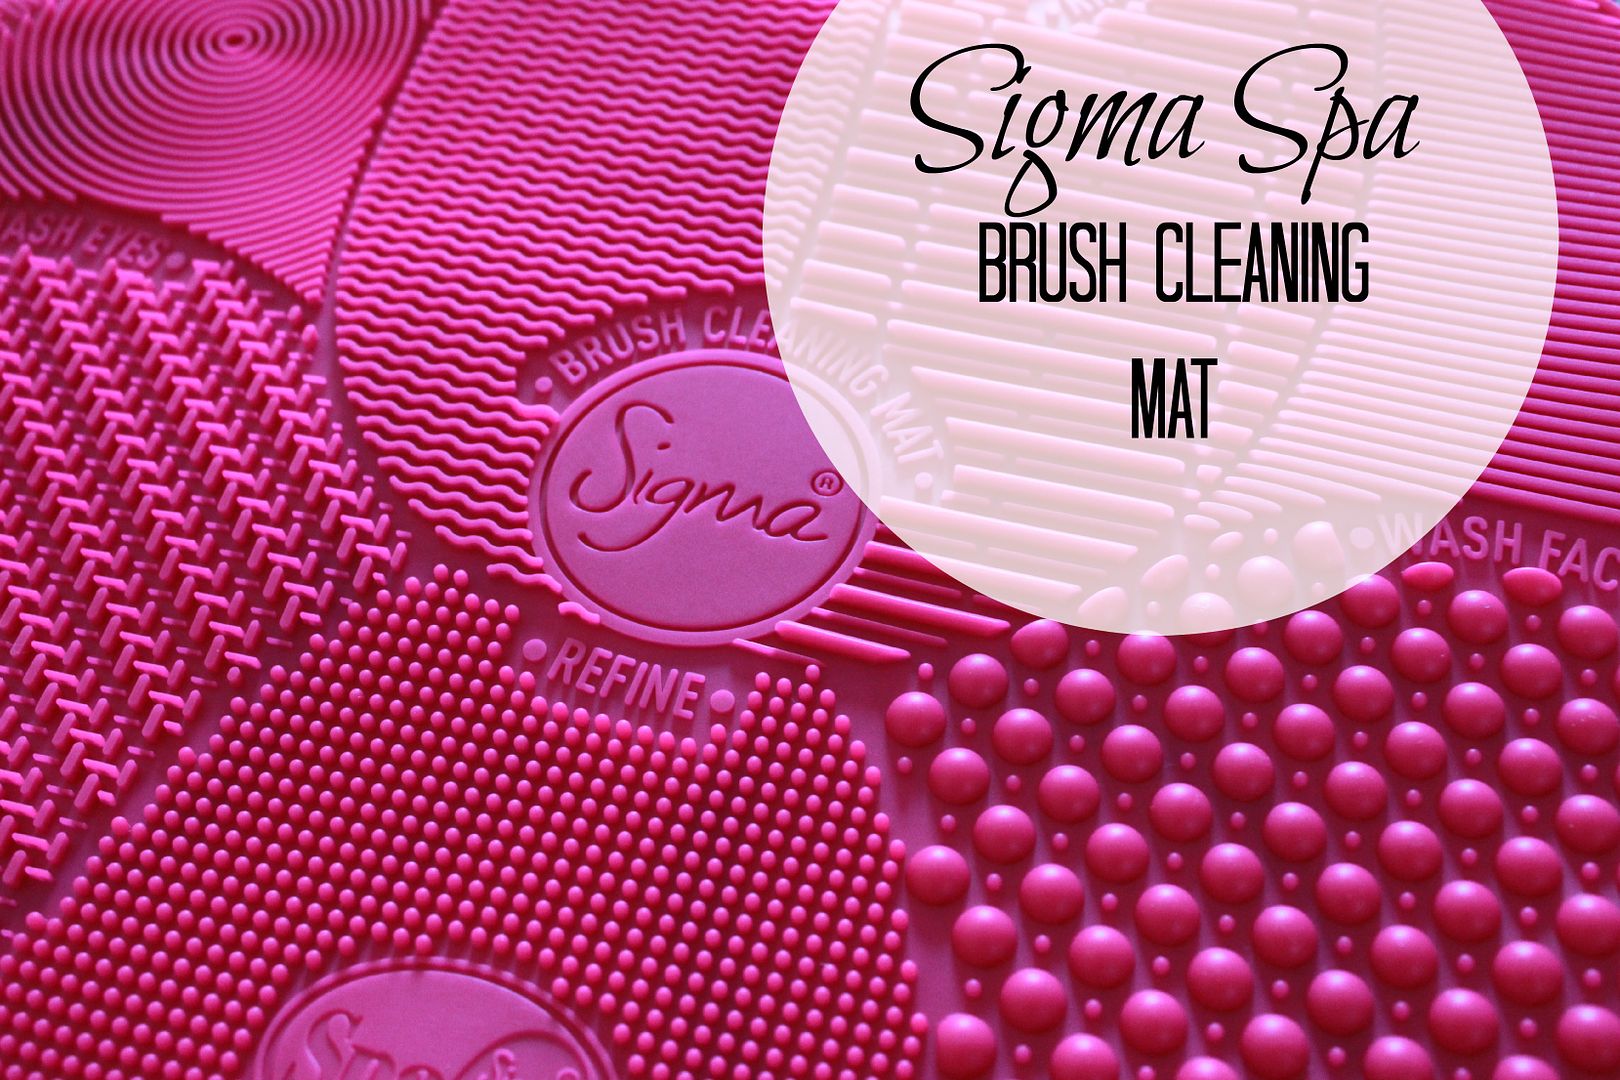 sigma-spa-cleaning-brush-mat